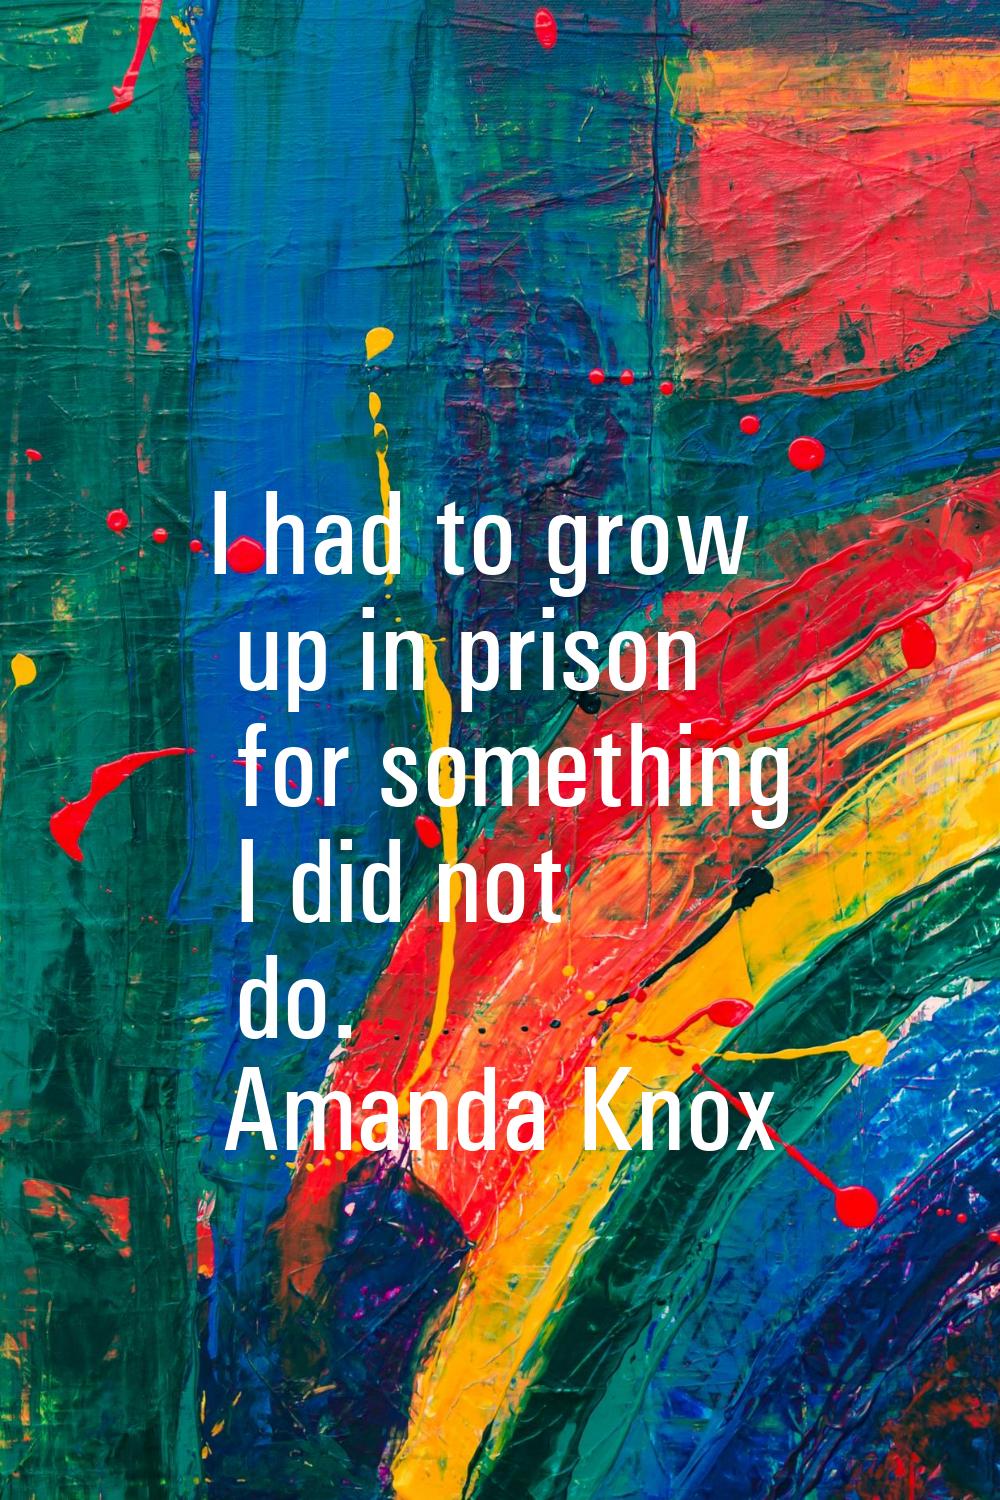 I had to grow up in prison for something I did not do.